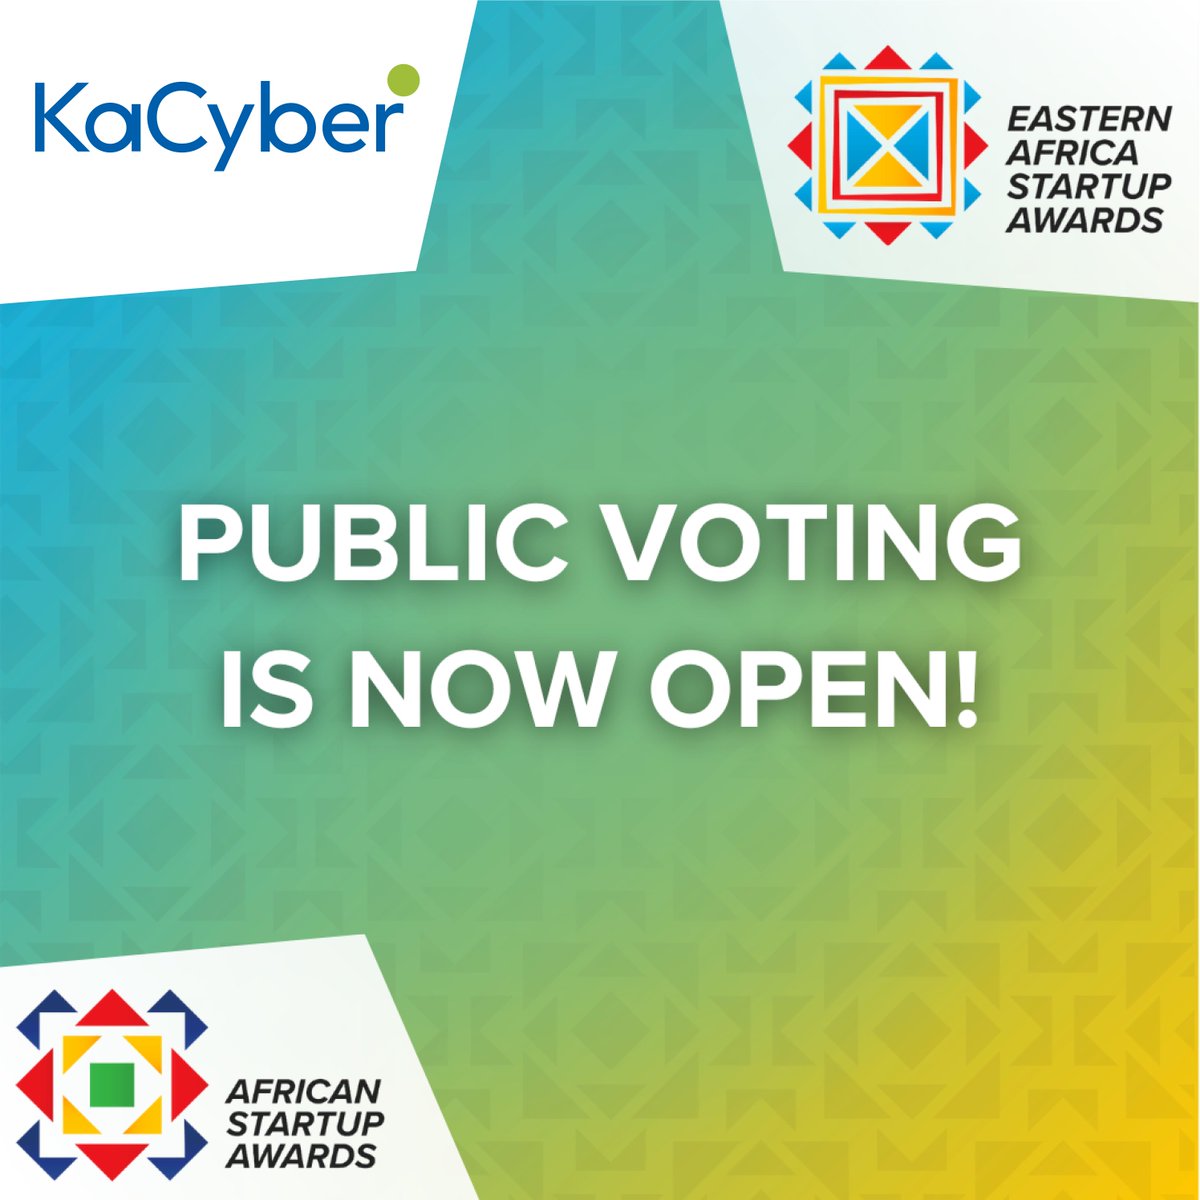 Public voting for the 2023 @AfricanGSAwards competition is now open! If you believe that @KaCyberApp deserve to be a #RegionalWinner, vote for @KaCyberApp at bit.ly/EASTERNPV
#GSAwards #GSAfrica #innovator